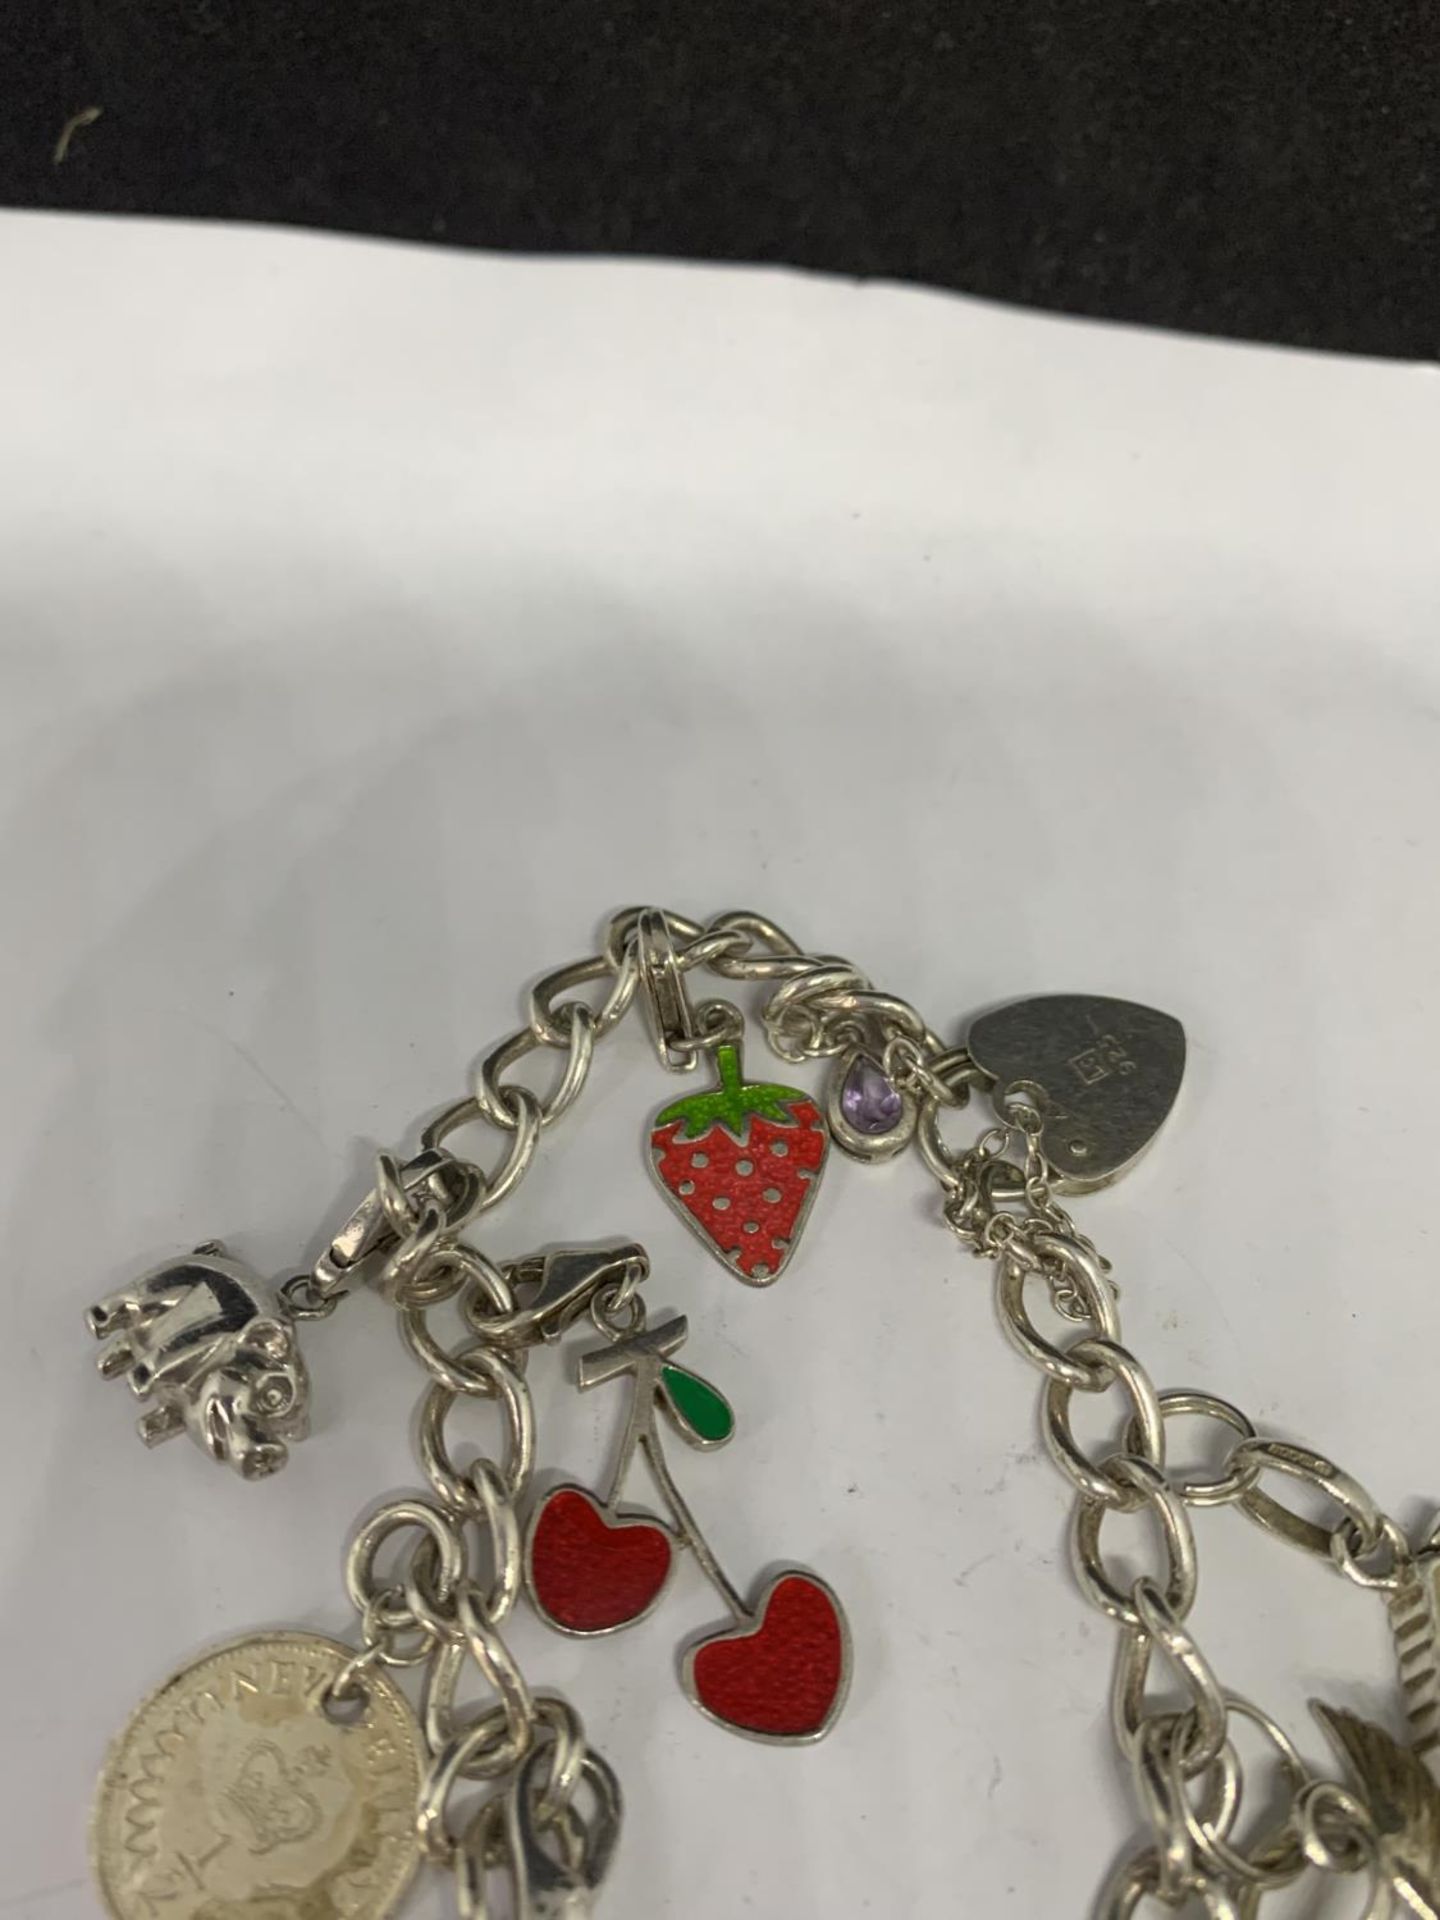 A HEAVY SILVER CHARM BRACELET WITH THIRTEEN CHARMS TO INCLUDE A STRAWBERRY, CHERRIES, DOVE ETC - Image 3 of 4